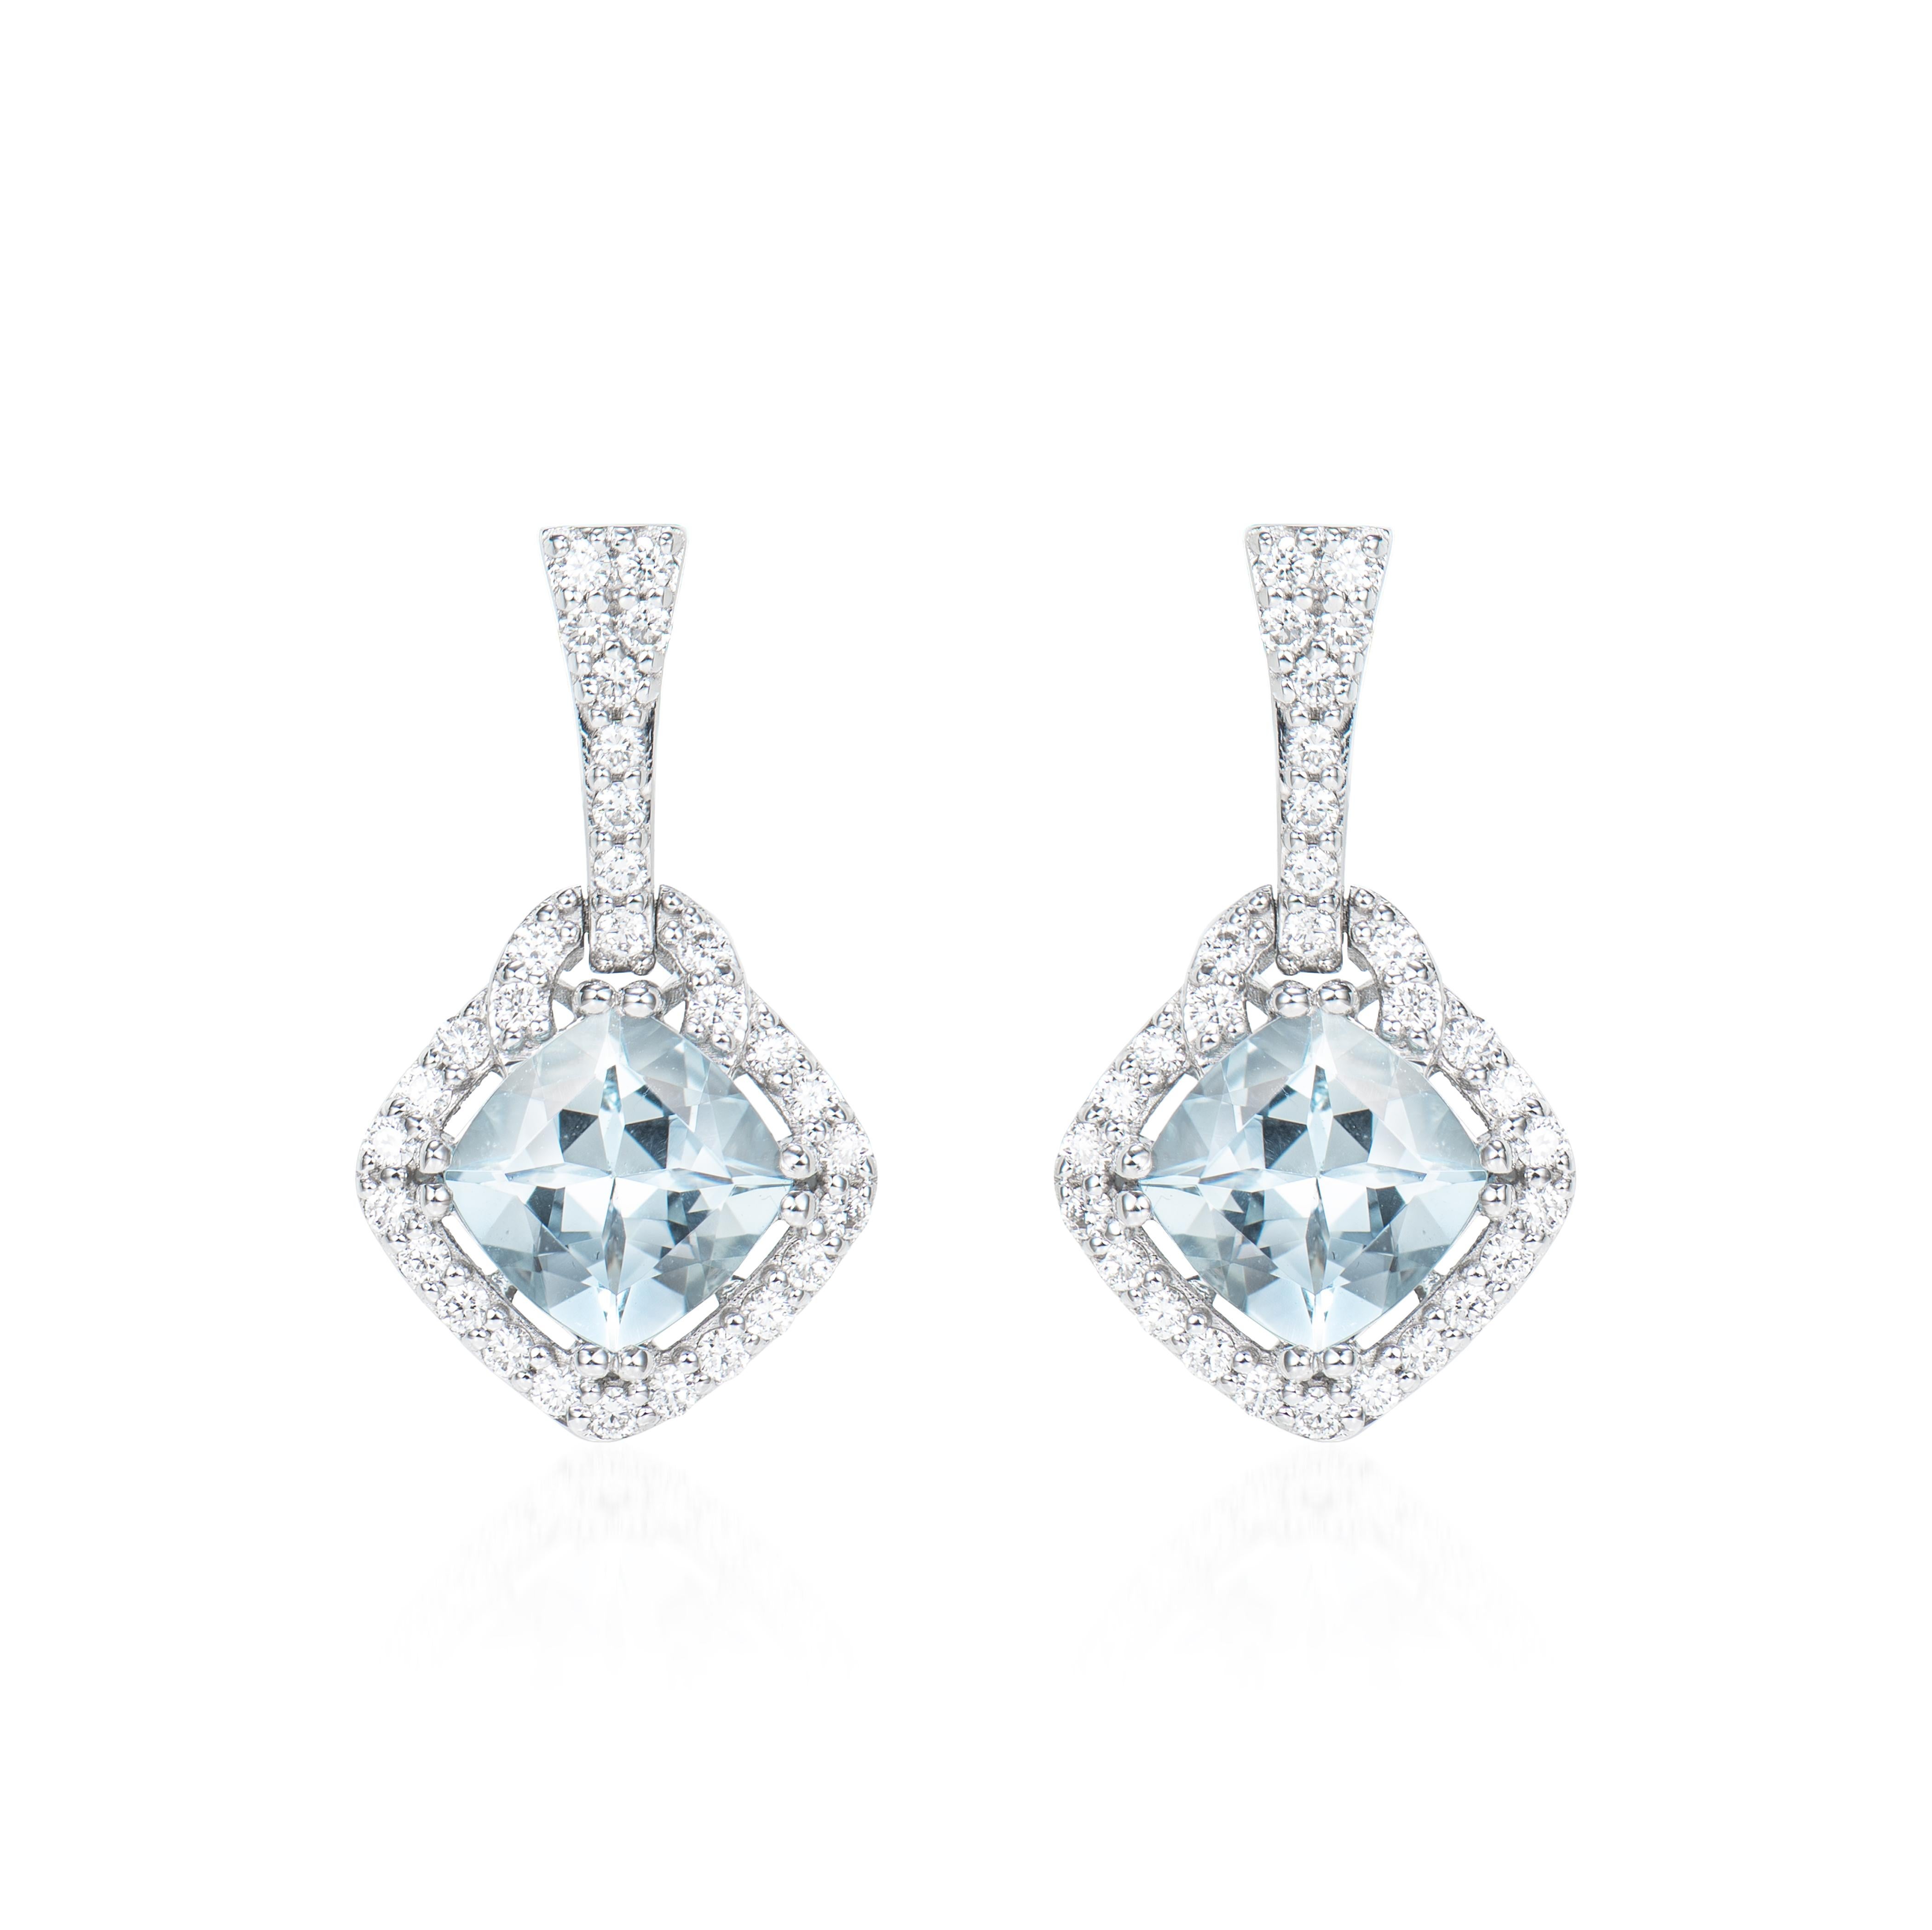 Contemporary 2.37 Carat Aquamarine Drop Earrings in 18Karat White Gold with Diamond For Sale